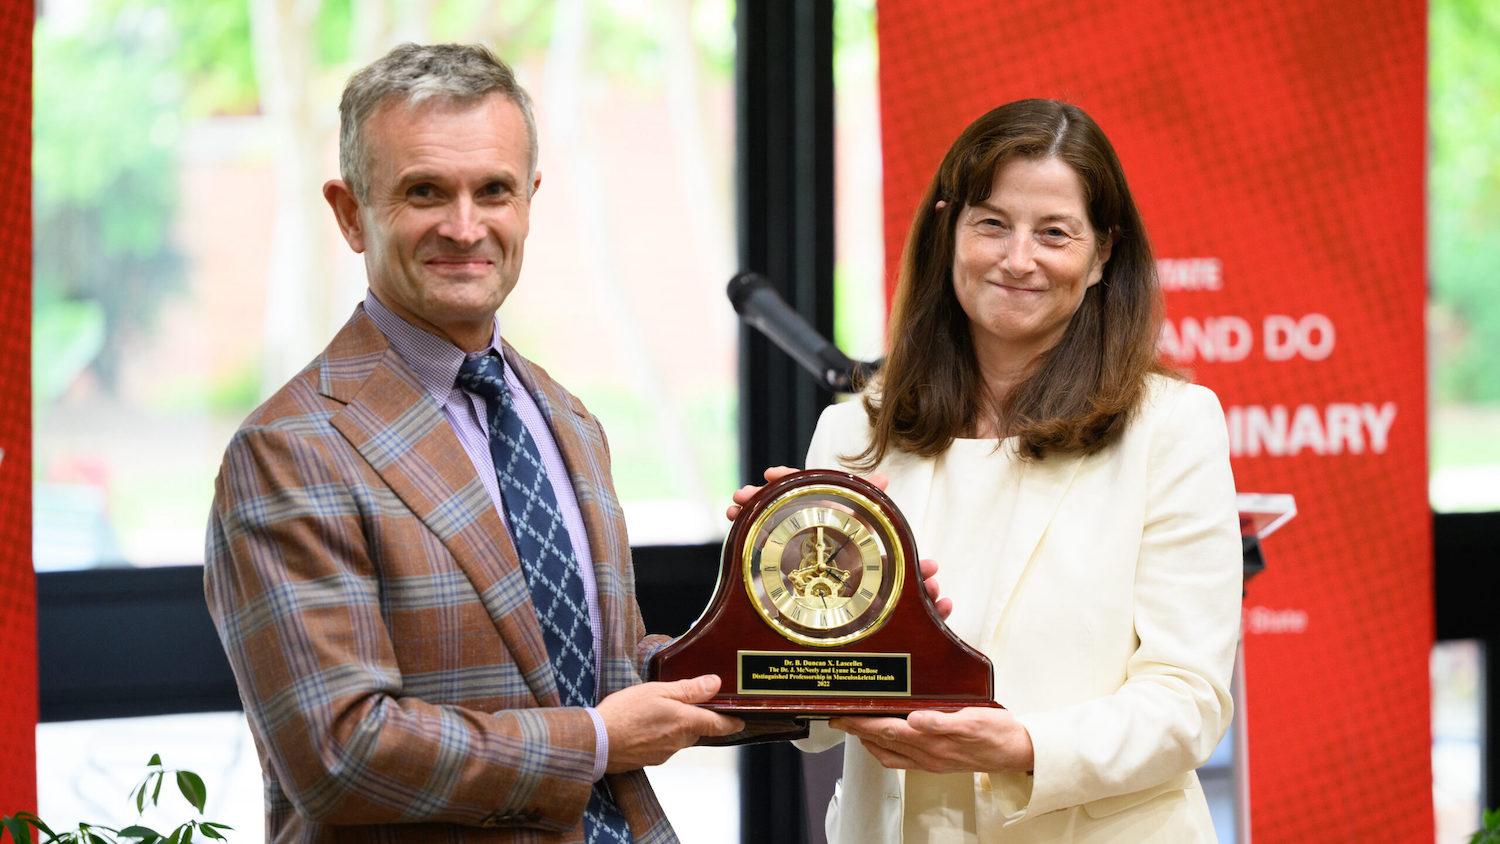 Duncan Lascelles receives a clock commemorating his appointment as a distinguished professor from CVM Dean Kate Meurs.